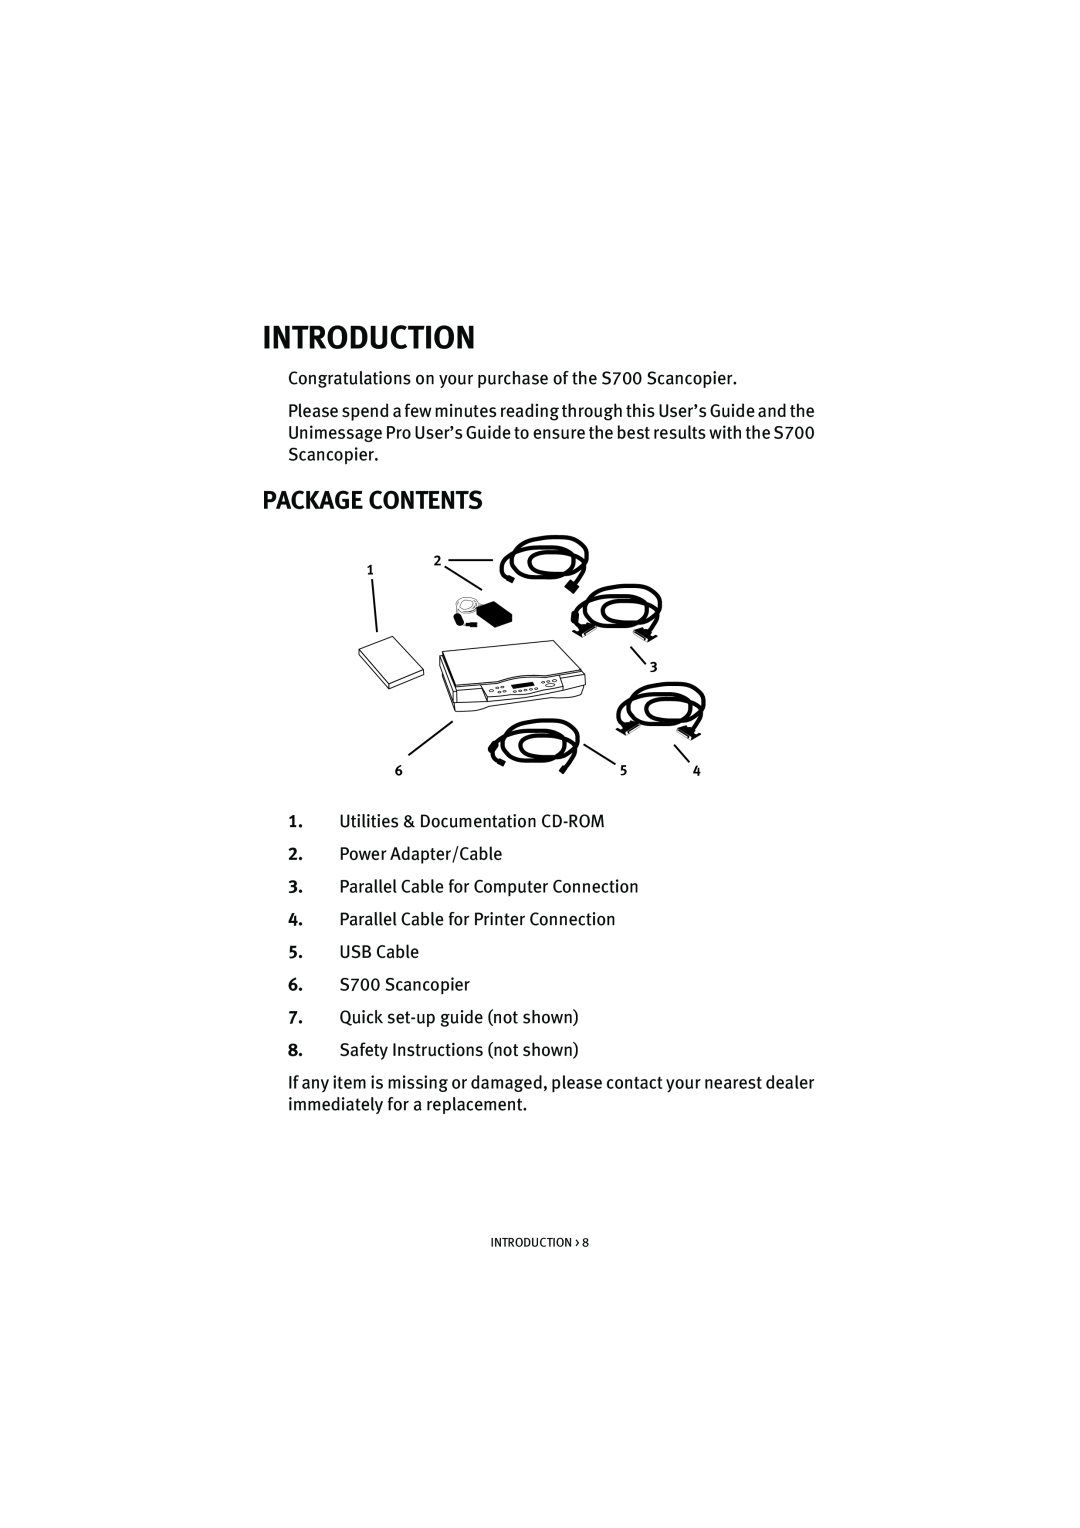 Oki S700 manual Introduction, Package Contents 